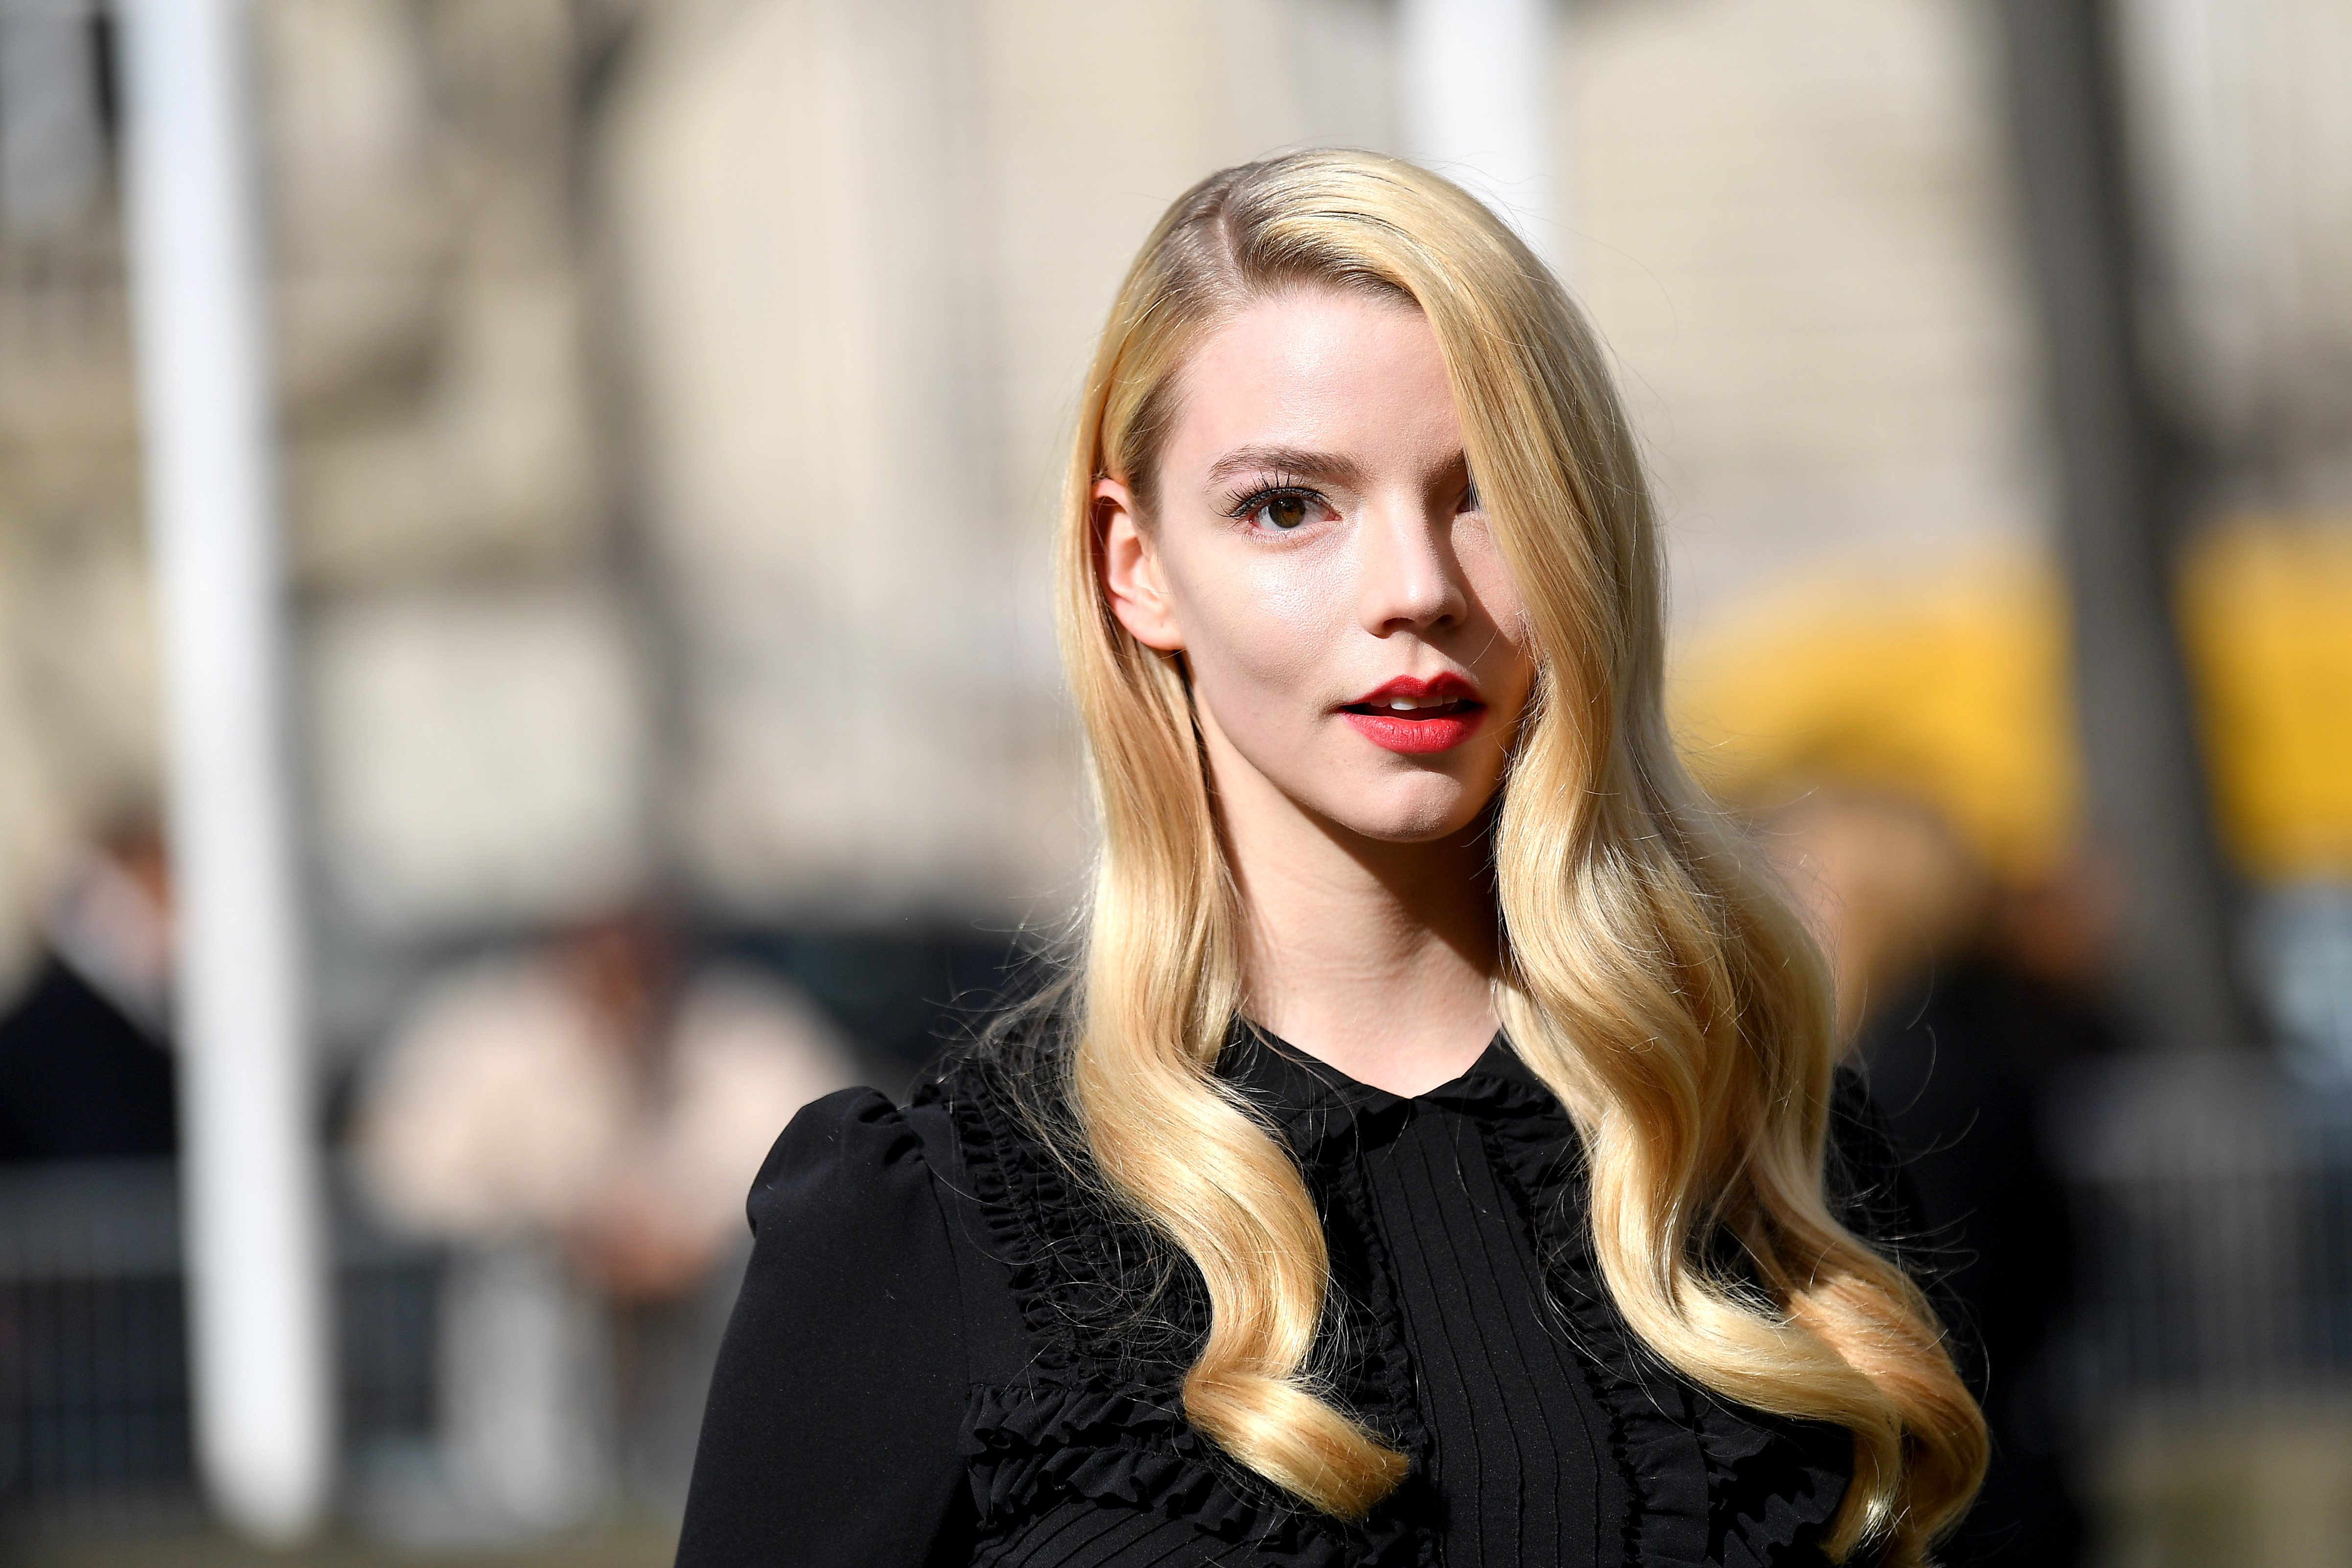 Anya Taylor-Joy attends the Paris Fashion Week on March 3, 2020 in Paris, France. | Photo: Getty Images